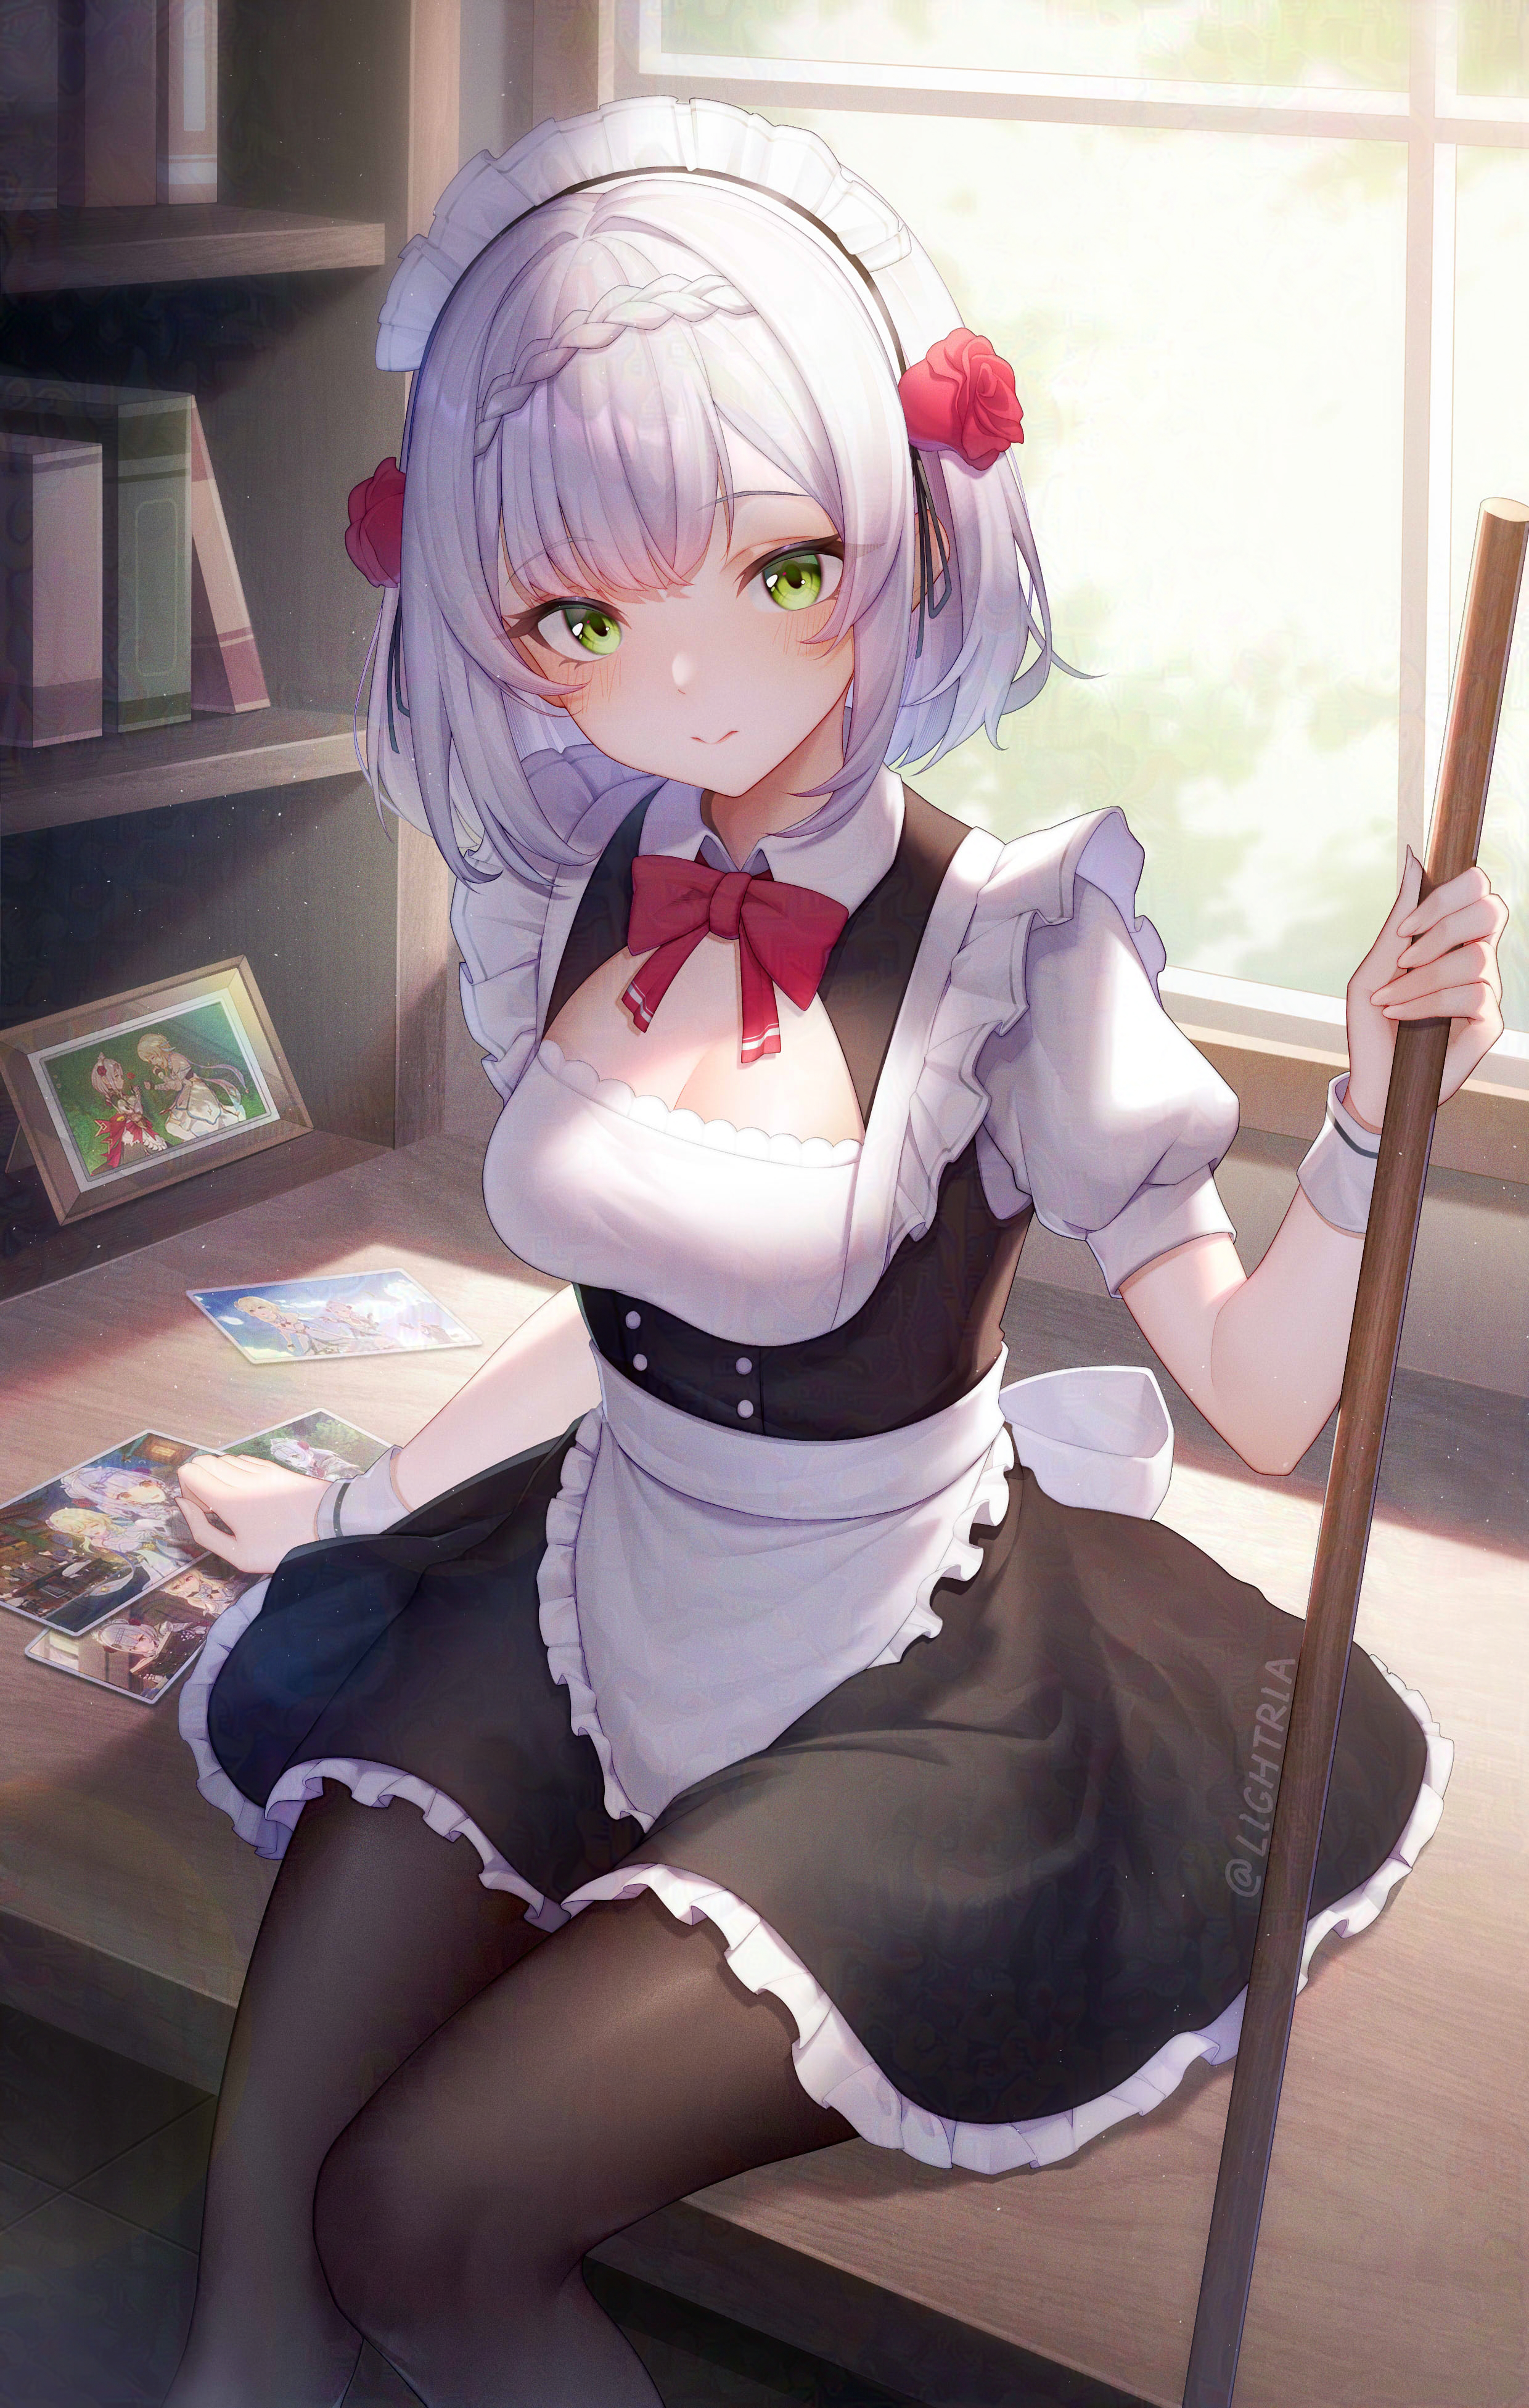 Anime 2480x3906 anime girls video games Lightria Genshin Impact Noelle (Genshin Impact) maid broom green eyes short hair portrait display maid outfit looking at viewer smiling